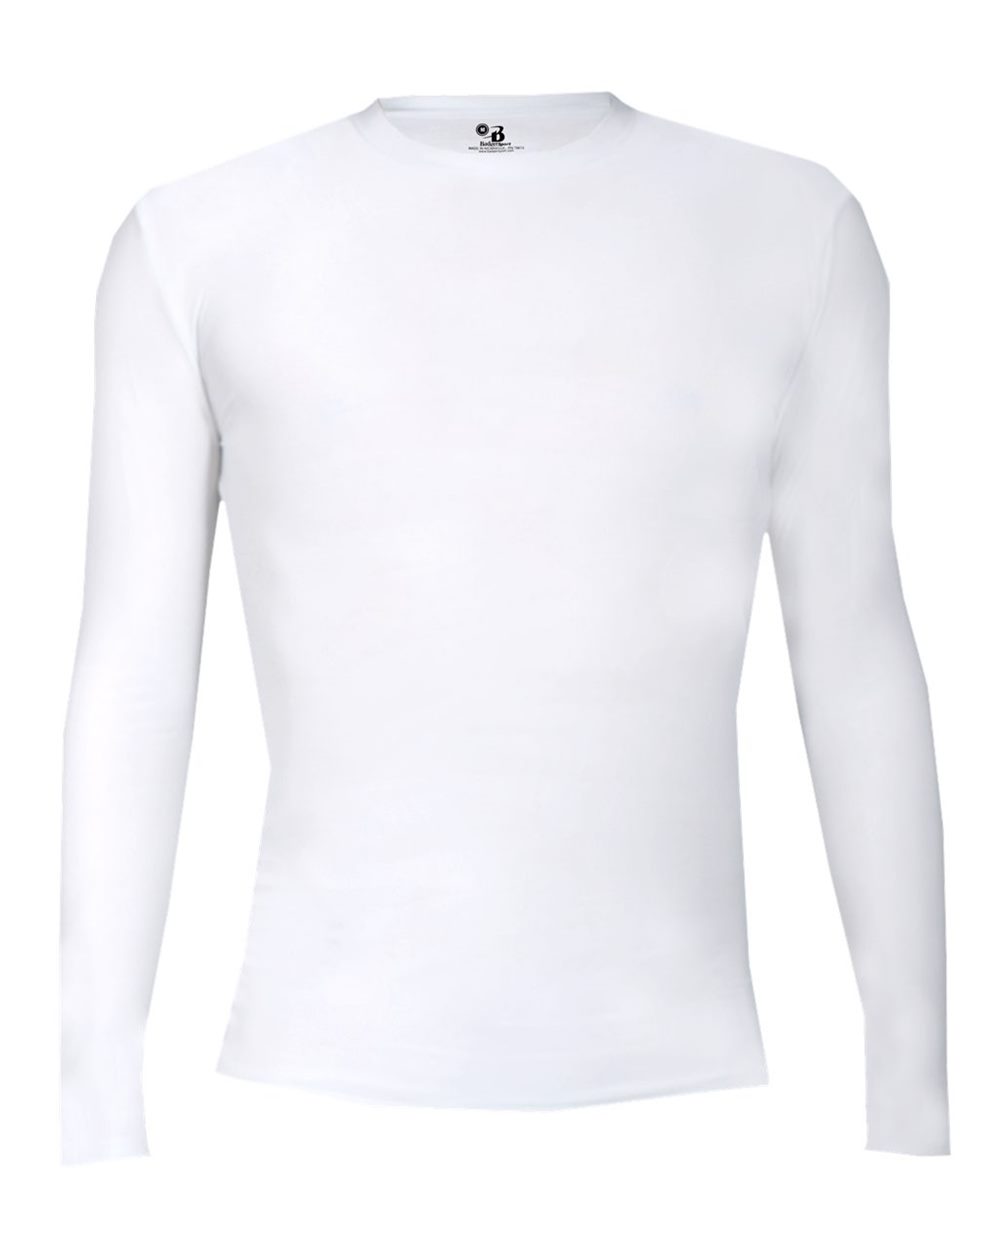 Pro-Compression Long Sleeve T-Shirt-